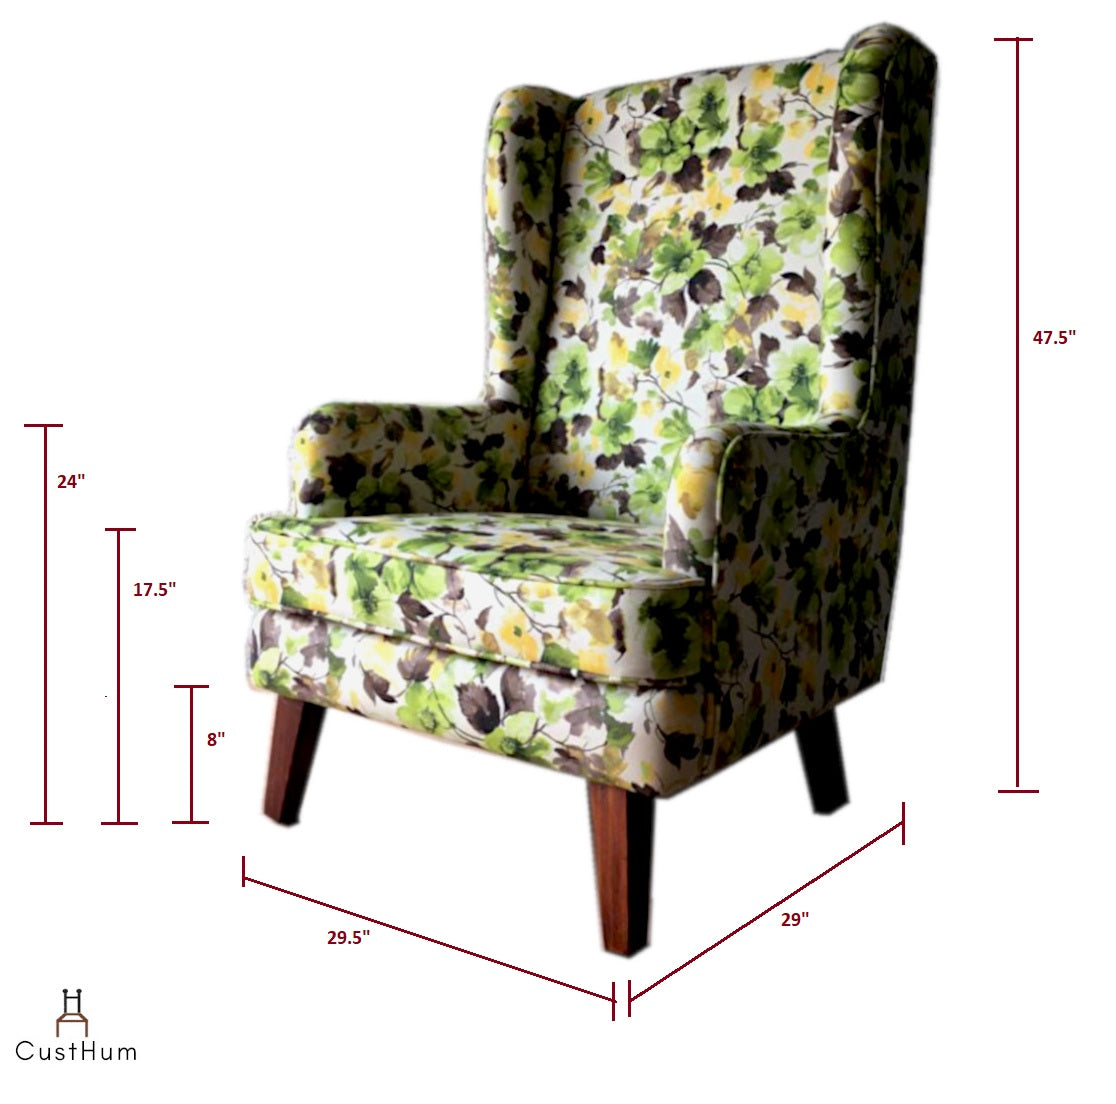 CustHum-Mirkwood-upholstered solid wood wing chair-dimensions